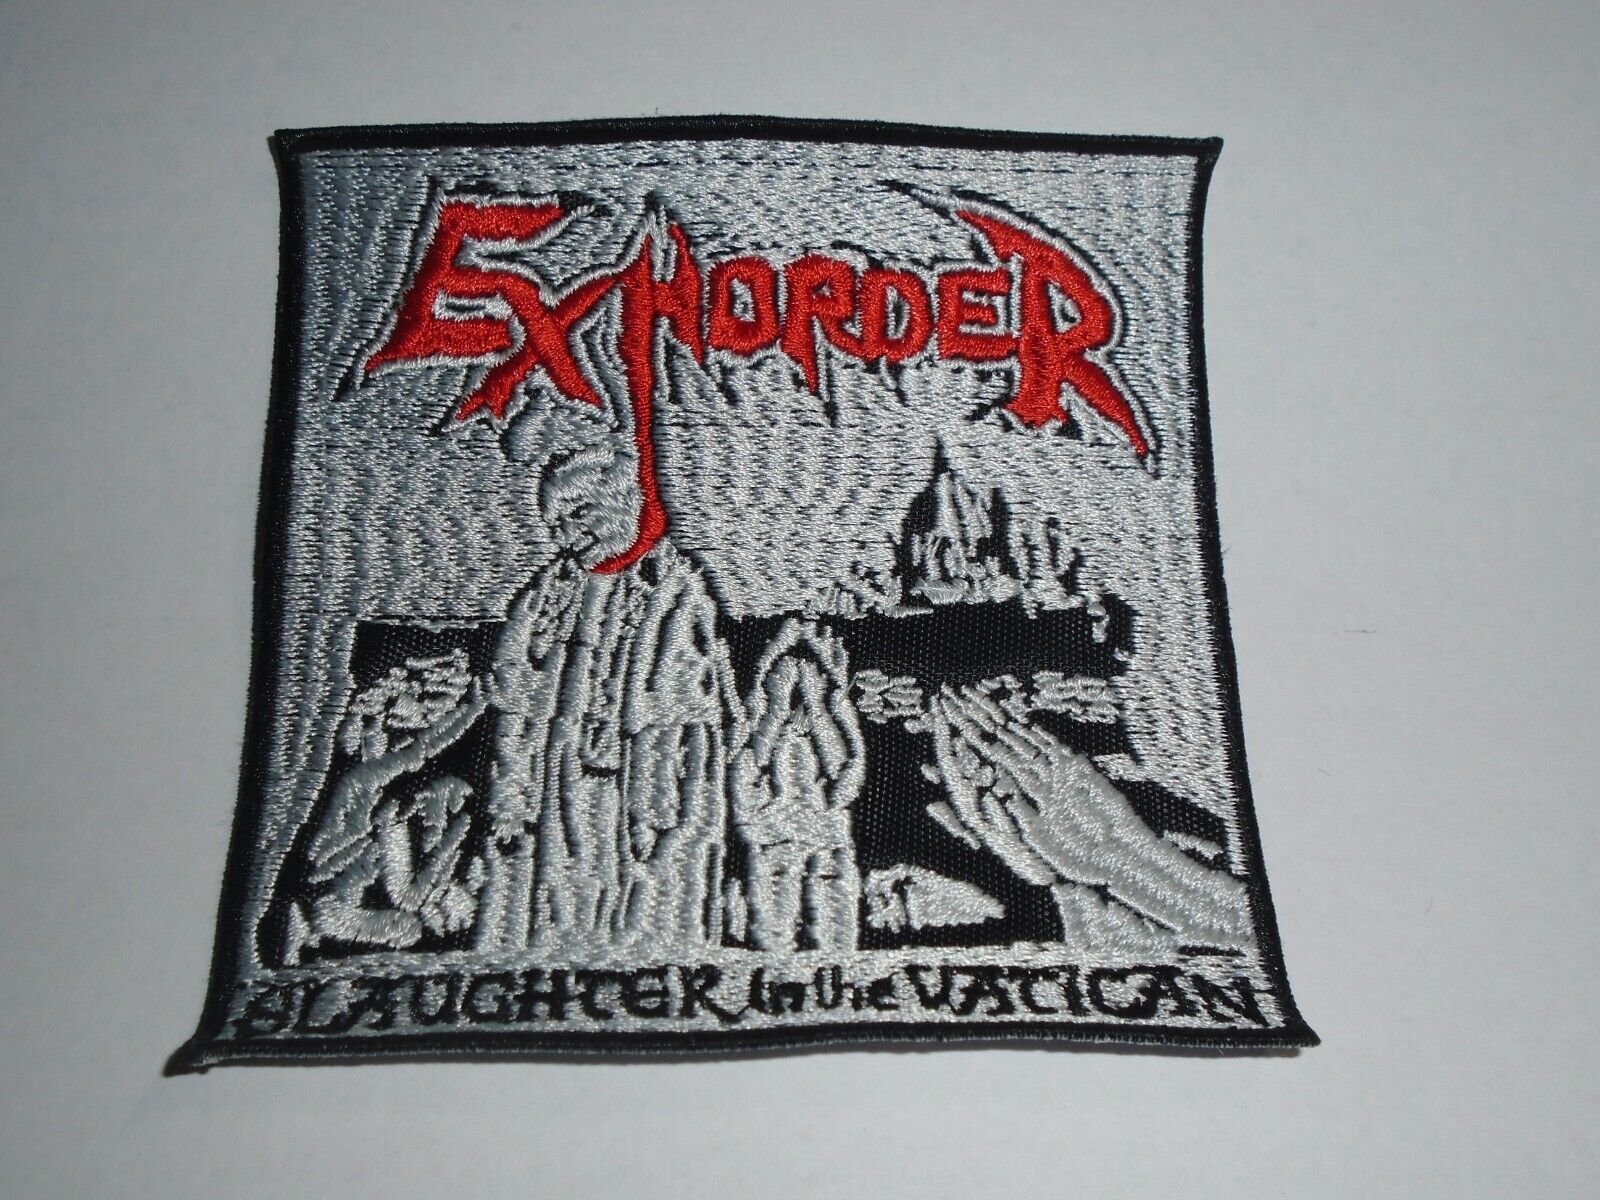 Exhorder Slaughter In The Vatican Embroidered Patch